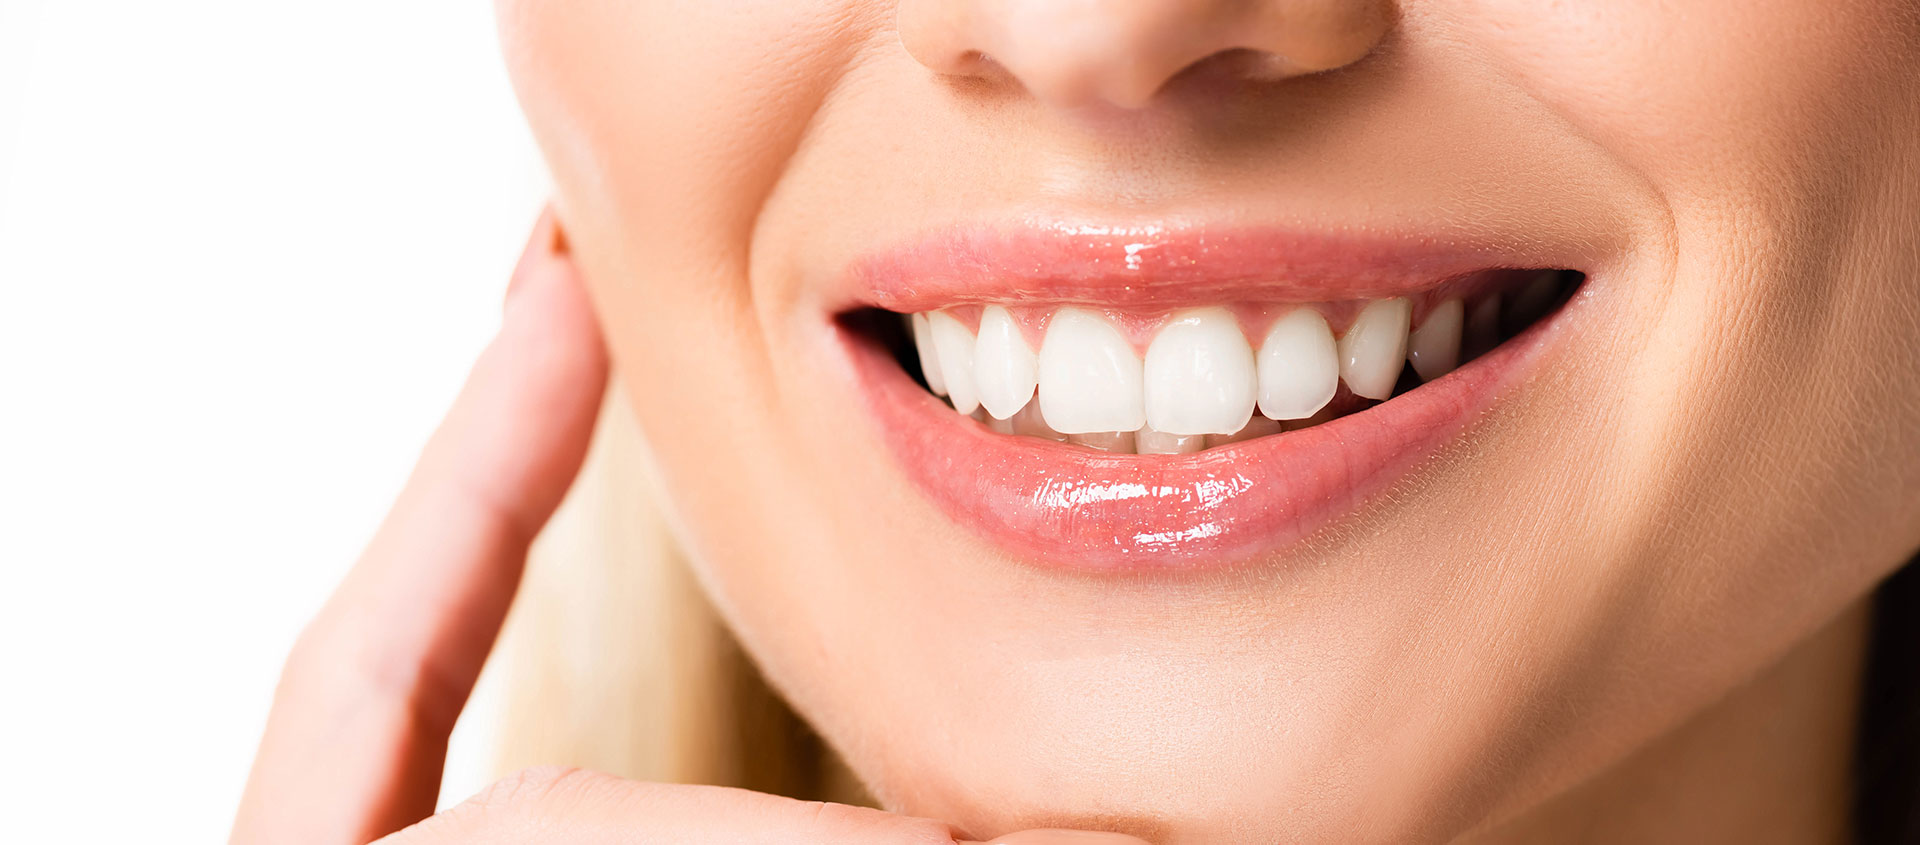 Dental veneers conceal tooth imperfections that detract from the beauty of your smile in Titus Dentistry in Middletown, IN